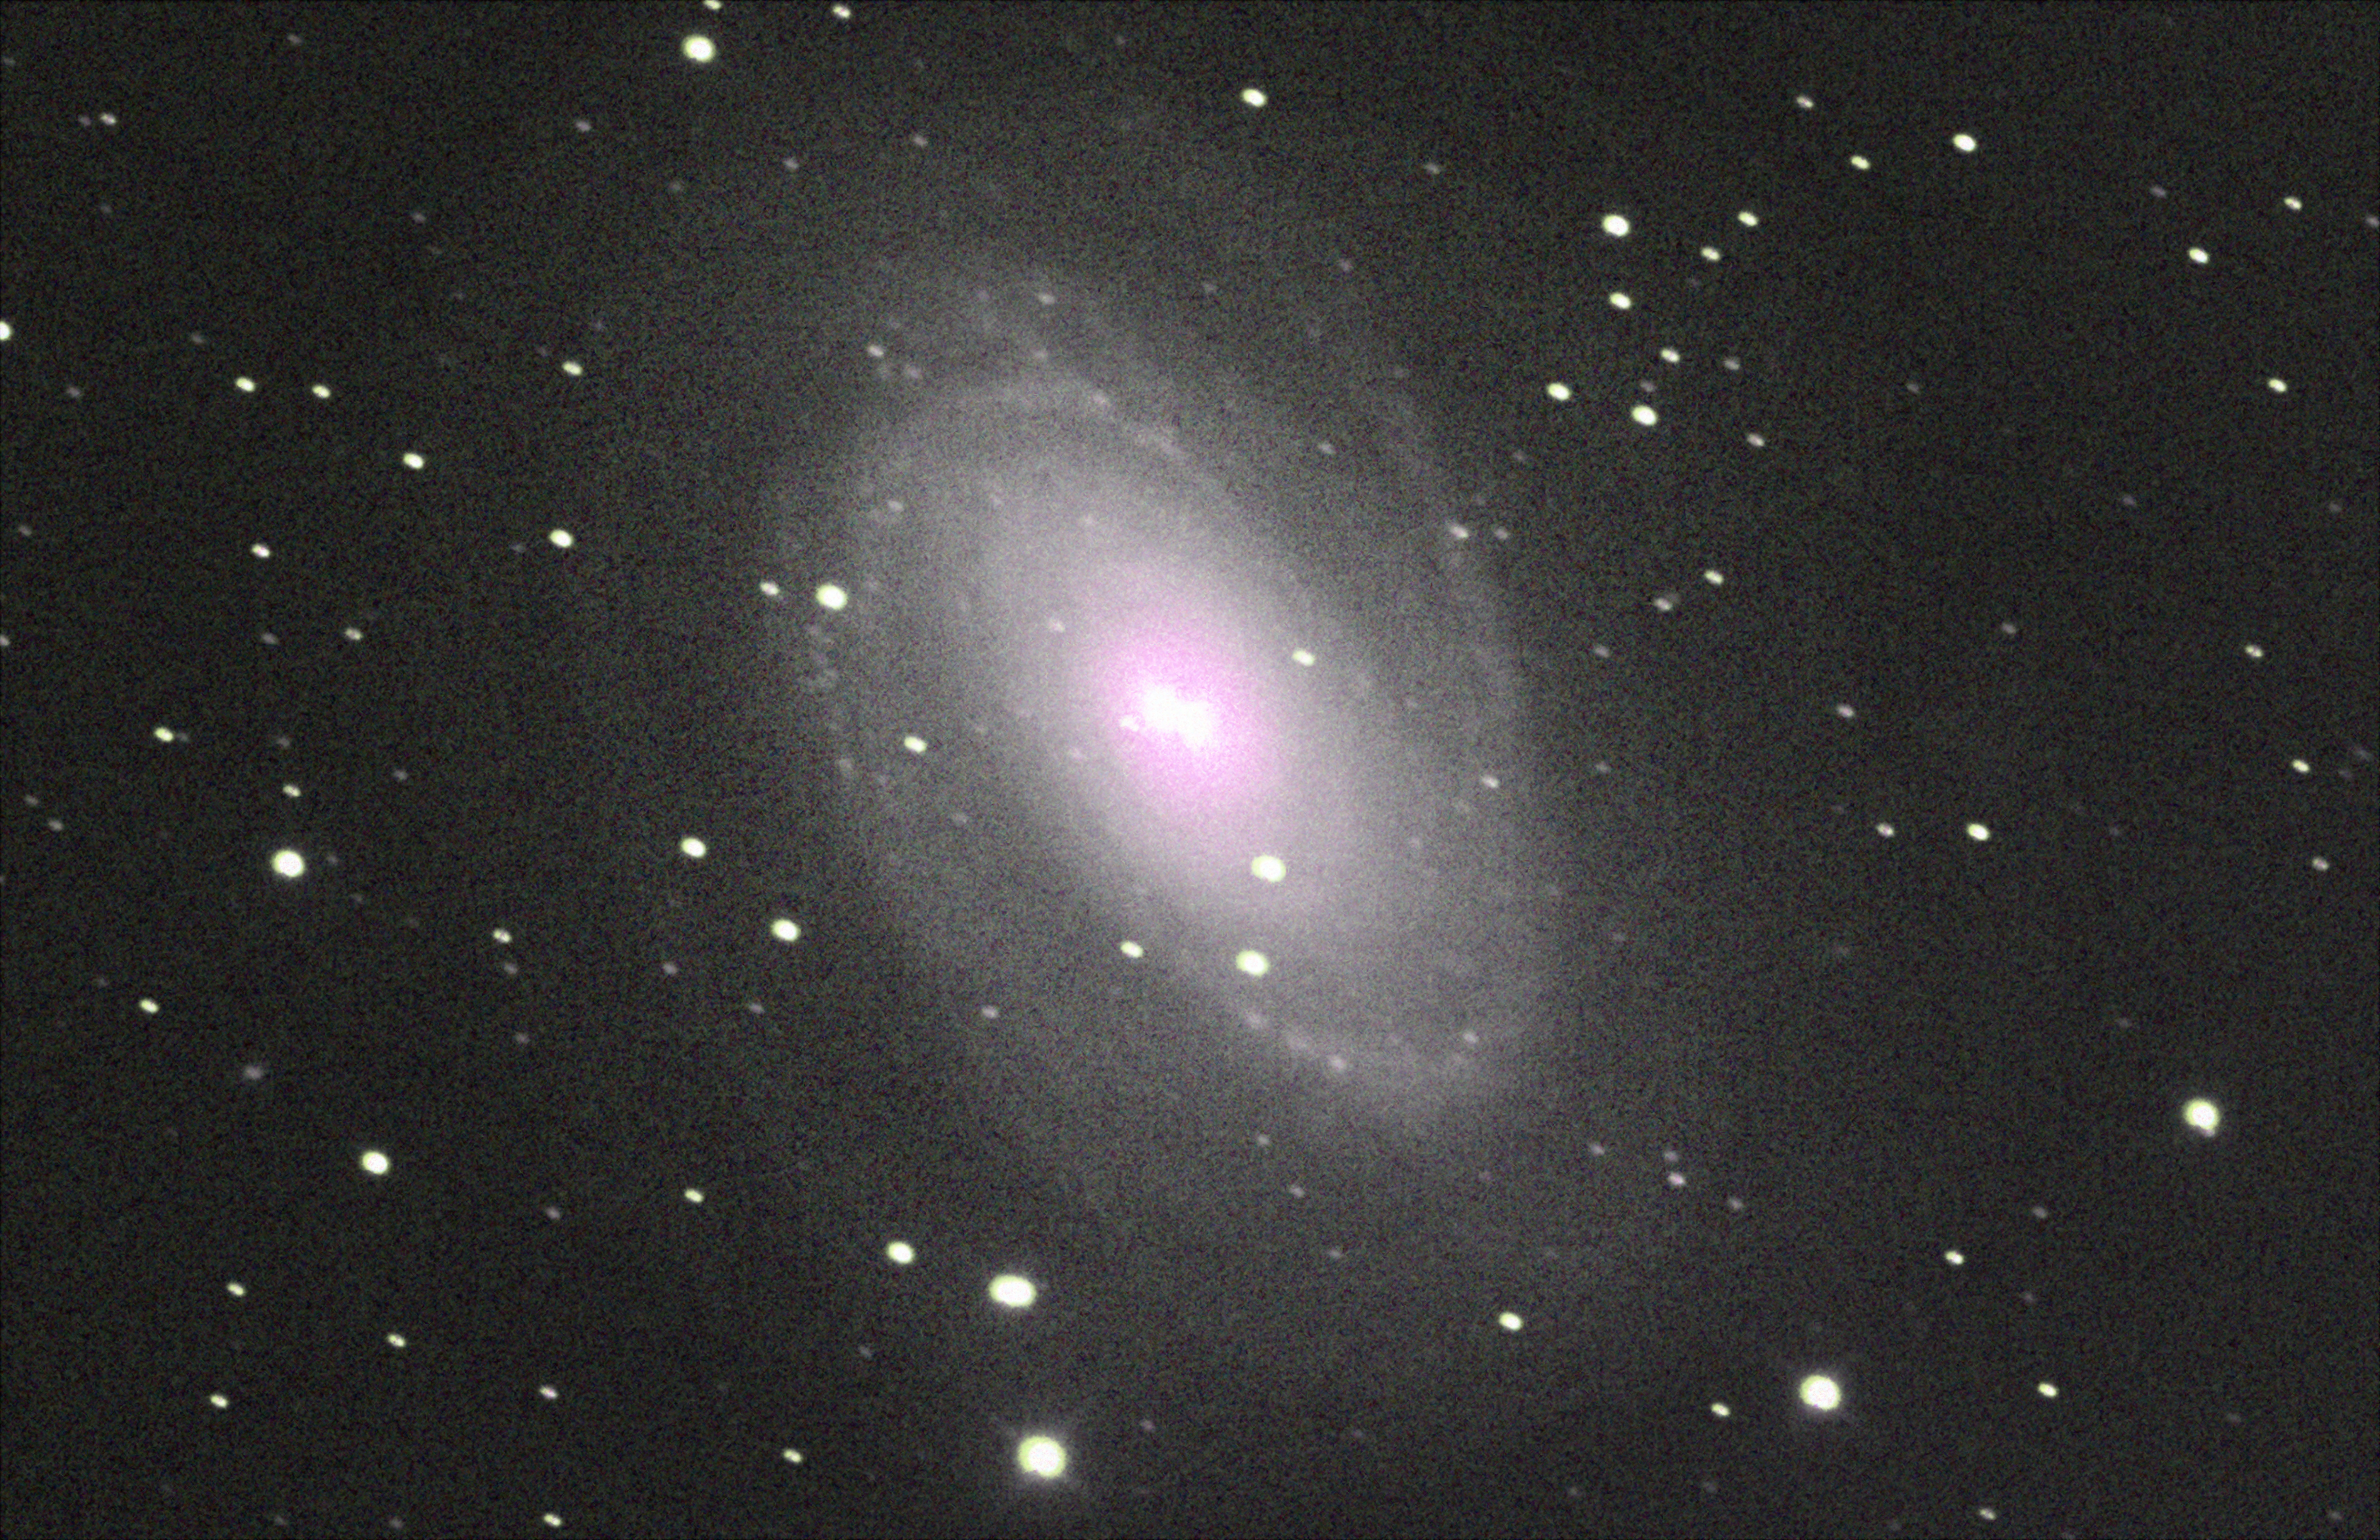 Photo of the M81 spiral galaxy